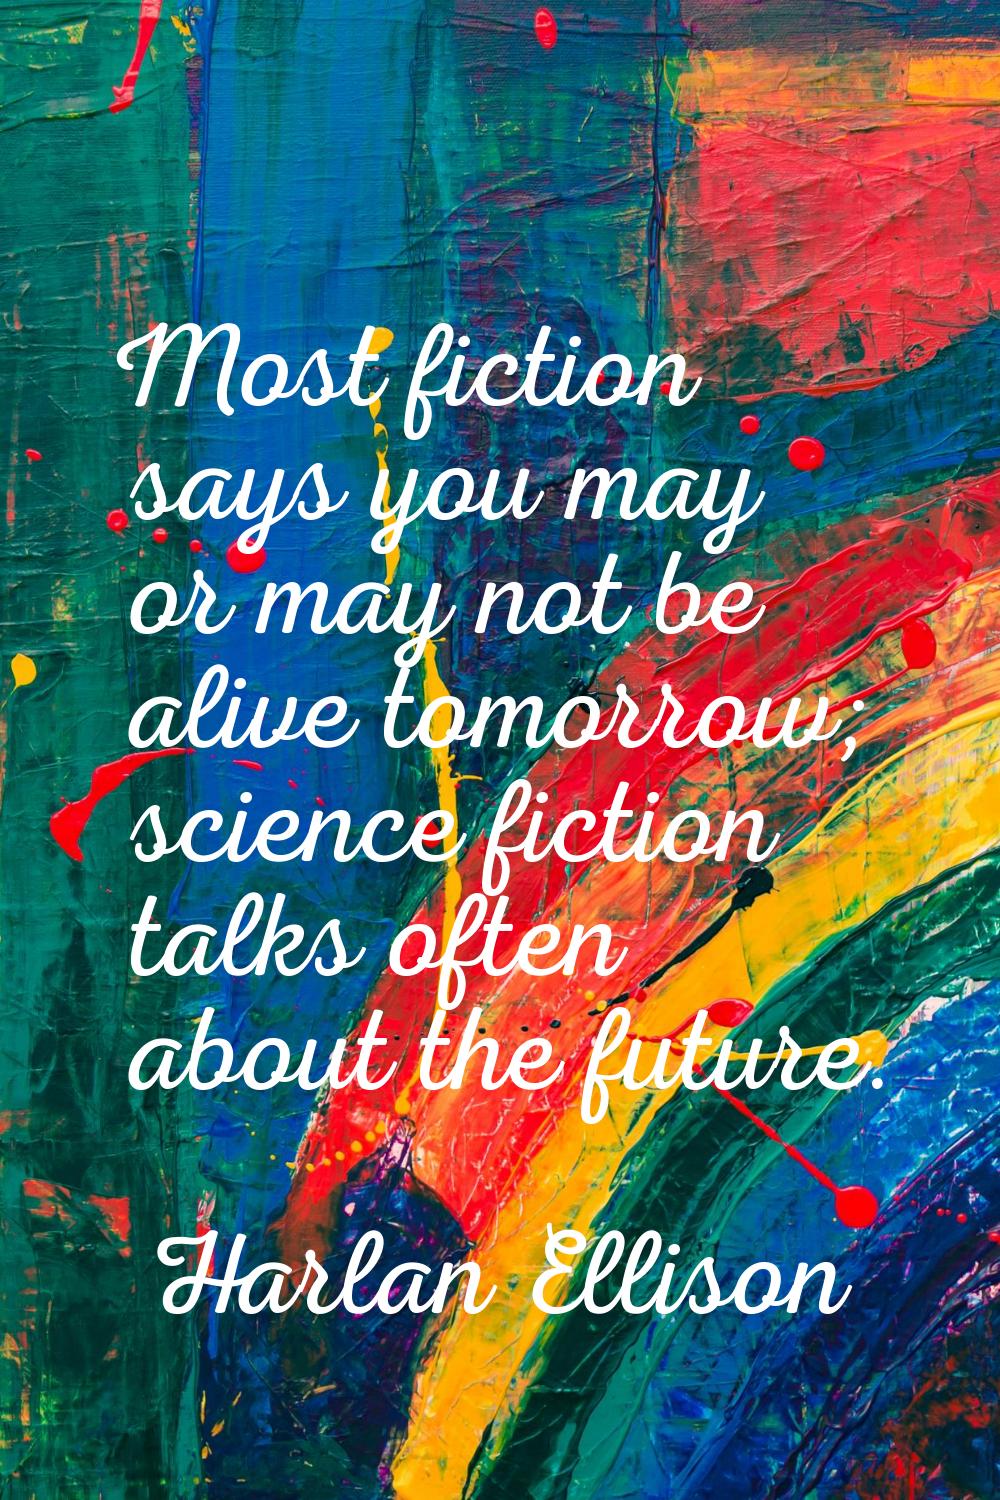 Most fiction says you may or may not be alive tomorrow; science fiction talks often about the futur